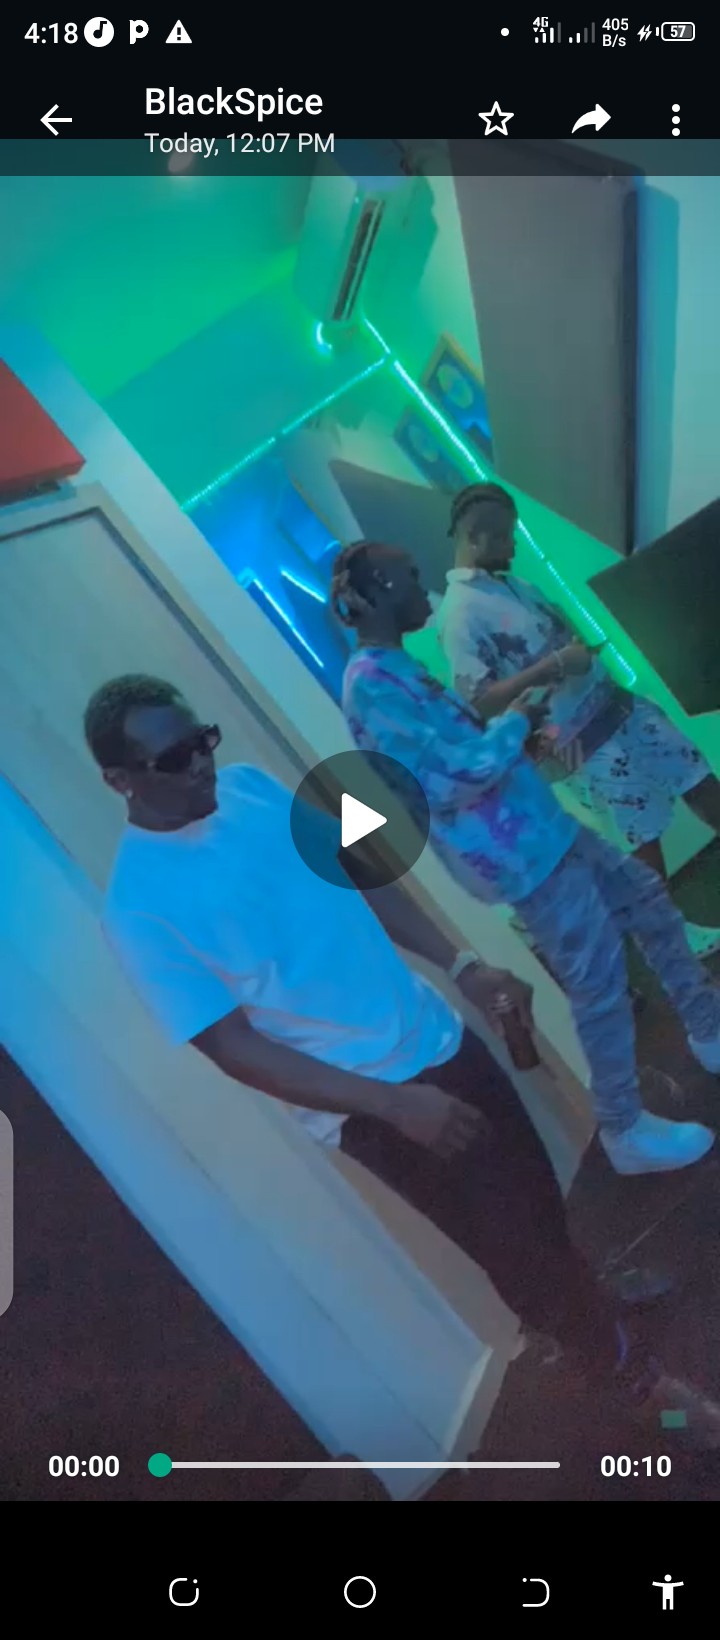 Terry Apala with Seyi Vibez and Rexxie Collide to Create Spectacular New Music (Video)